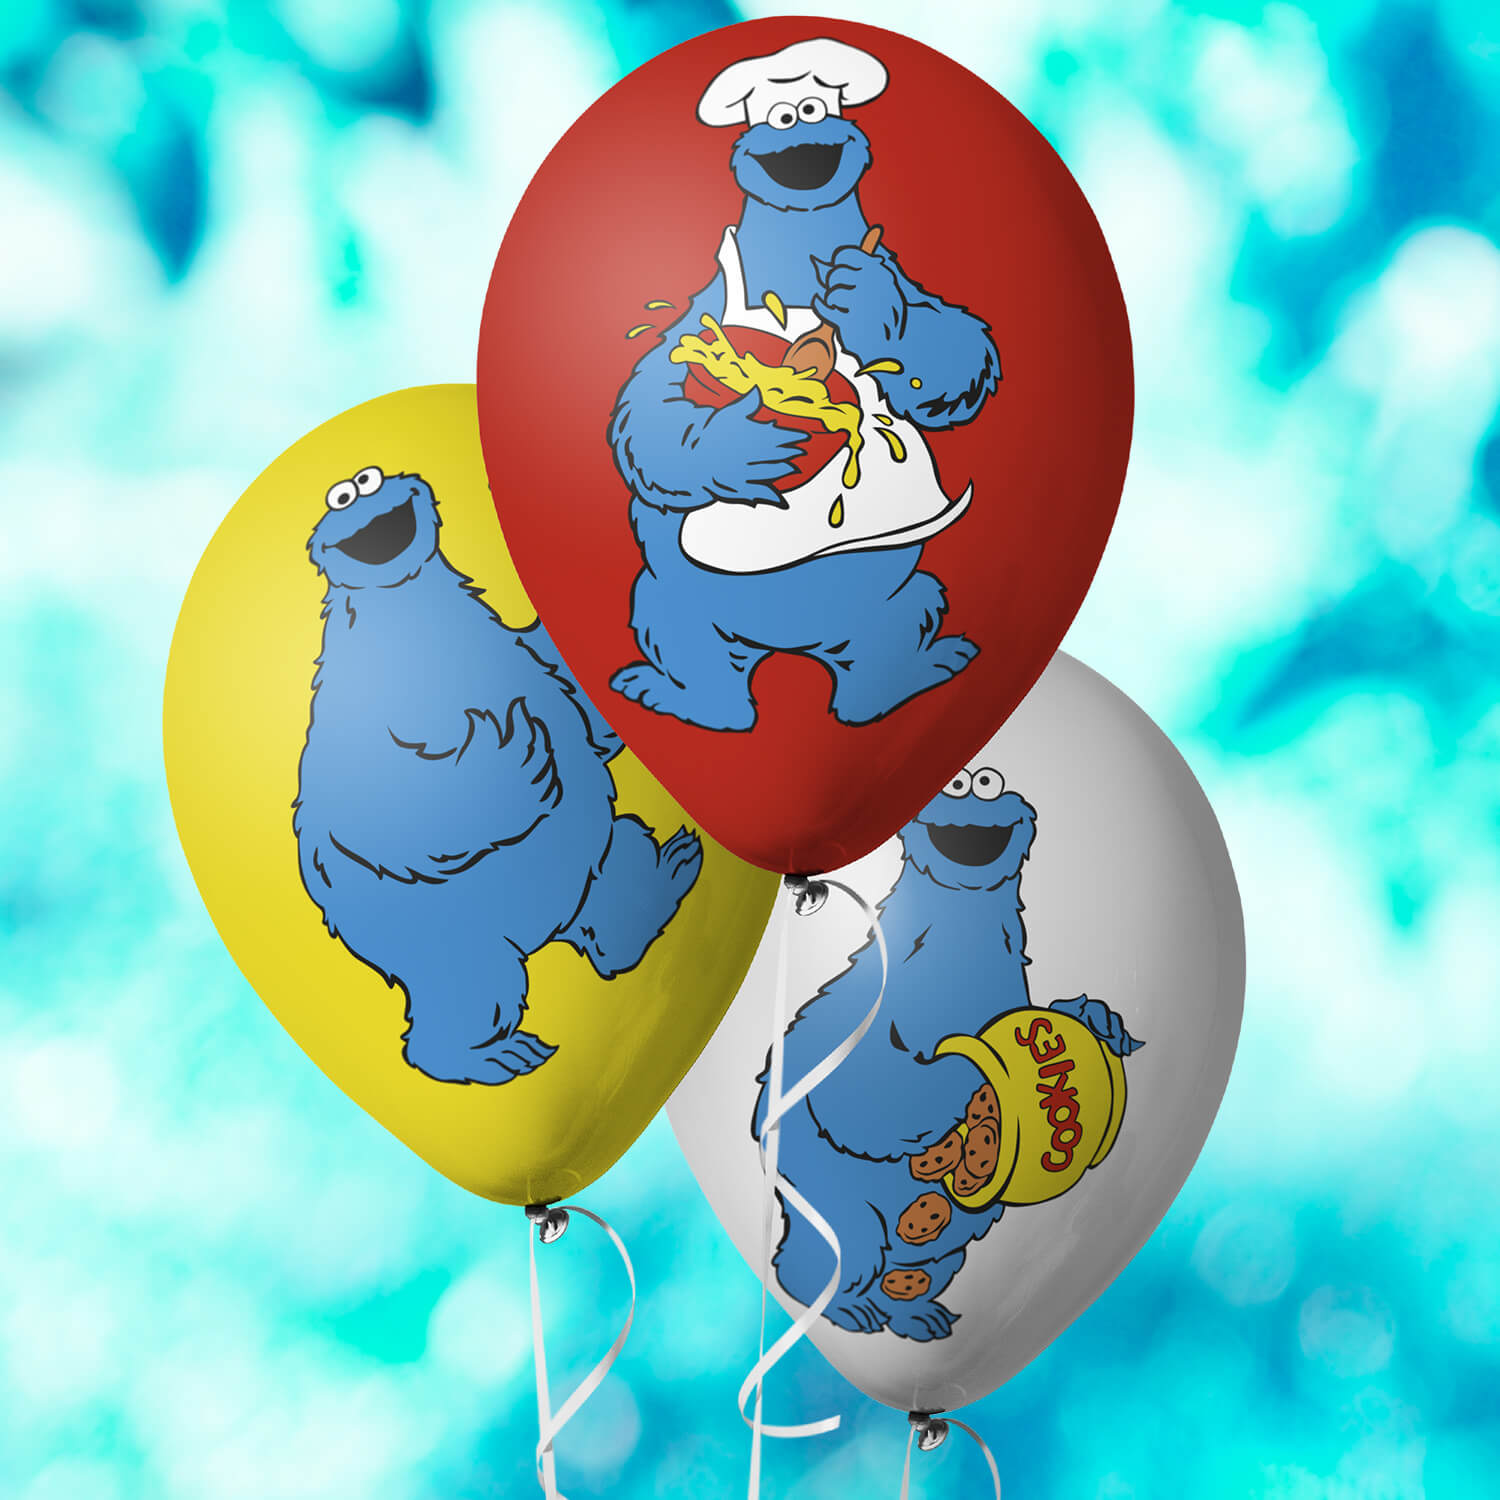 Cookie monster on three balloons.